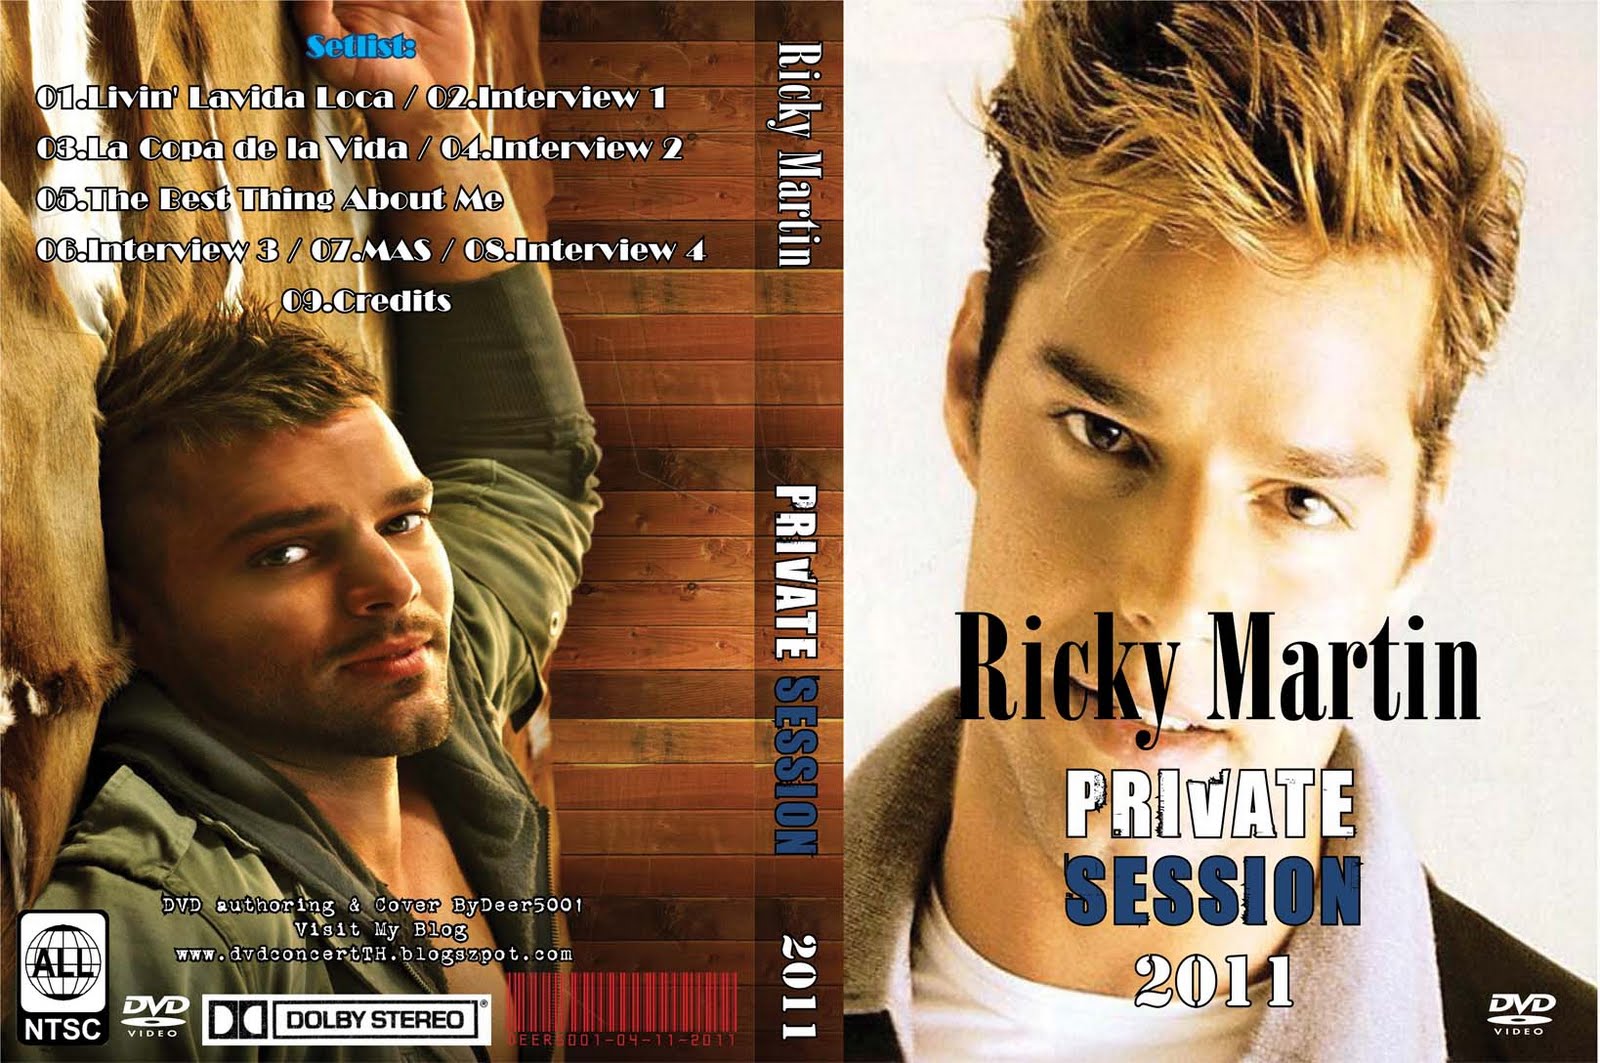 http://3.bp.blogspot.com/-Gi-BrUMxh2Y/TaWFoG_YIBI/AAAAAAAACfE/MEa-0v5SP-I/s1600/DVD+Cover+Low+Quality+-+Ricky+Martin+-+Private+Sessions+-+02-13-2011.jpg